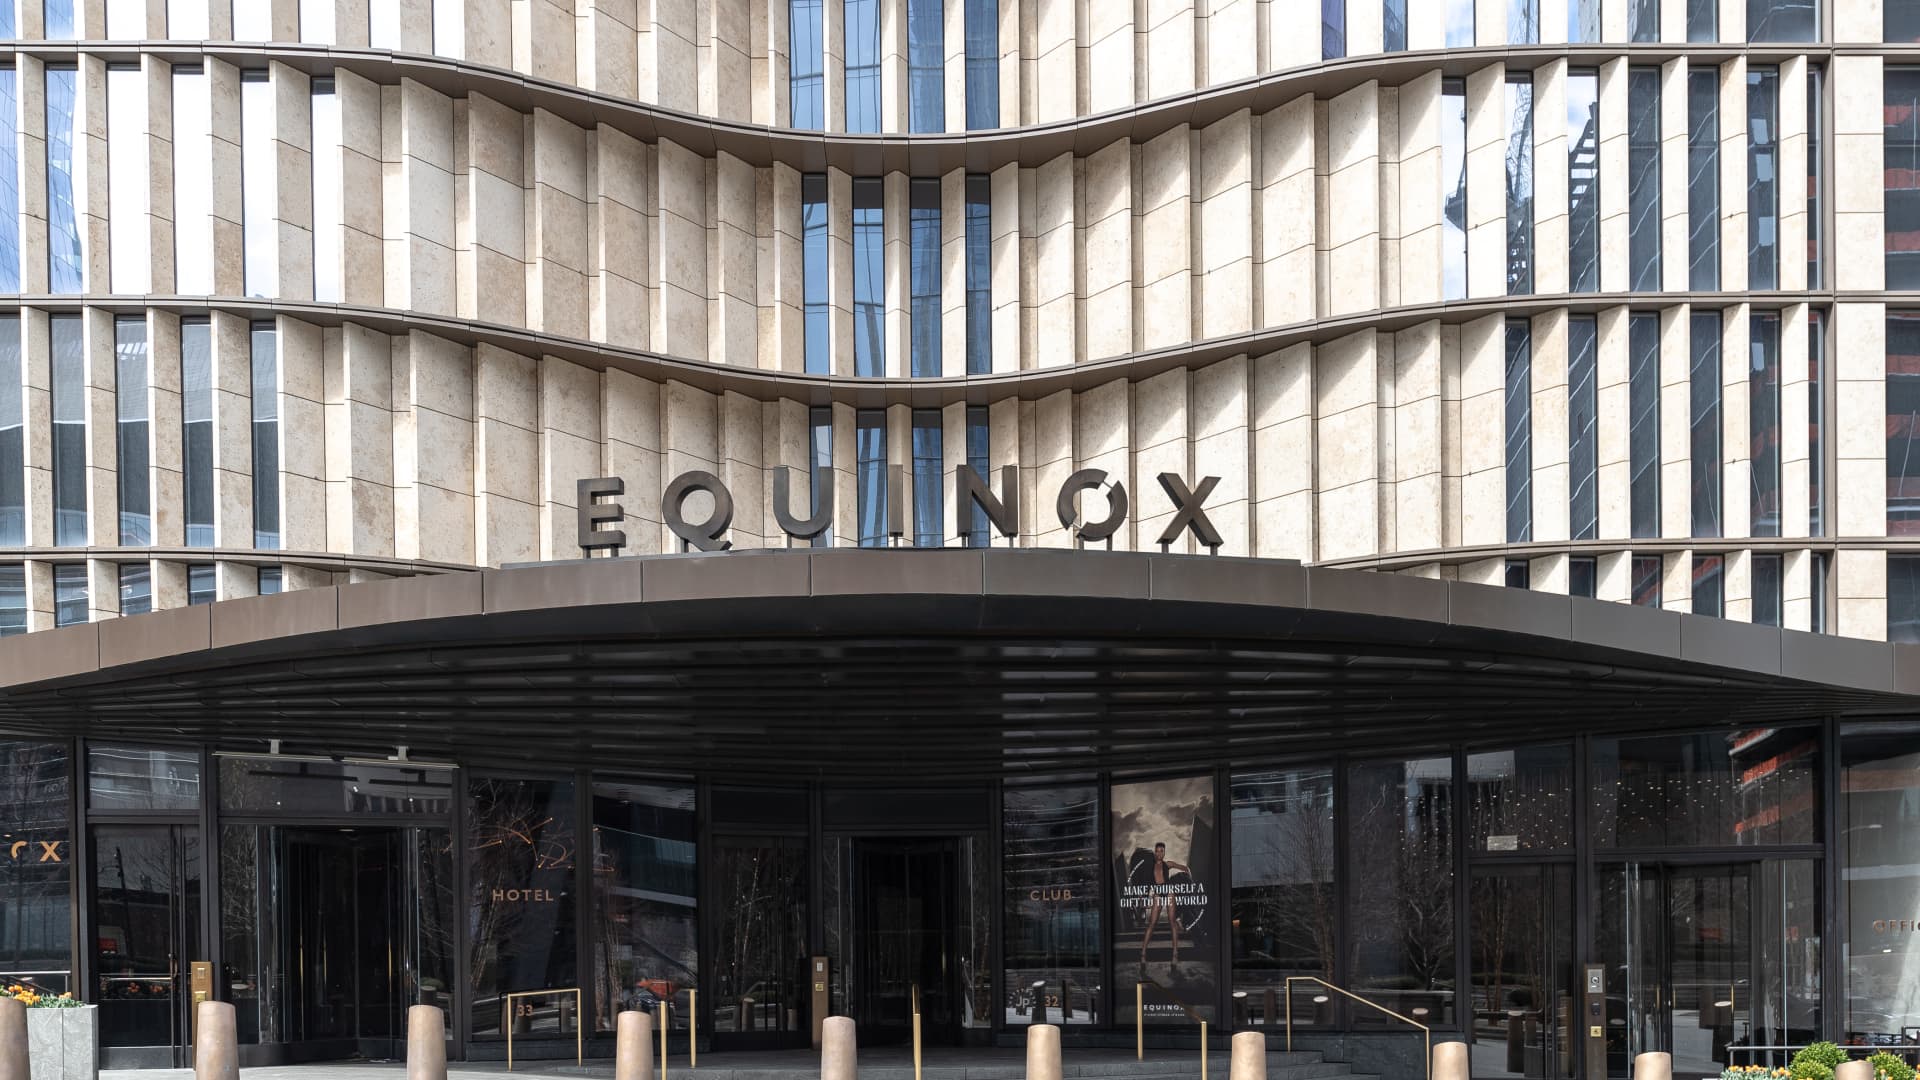 From Sept. 13, guests staying at New York City's Equinox Hotel must be vaccinated.